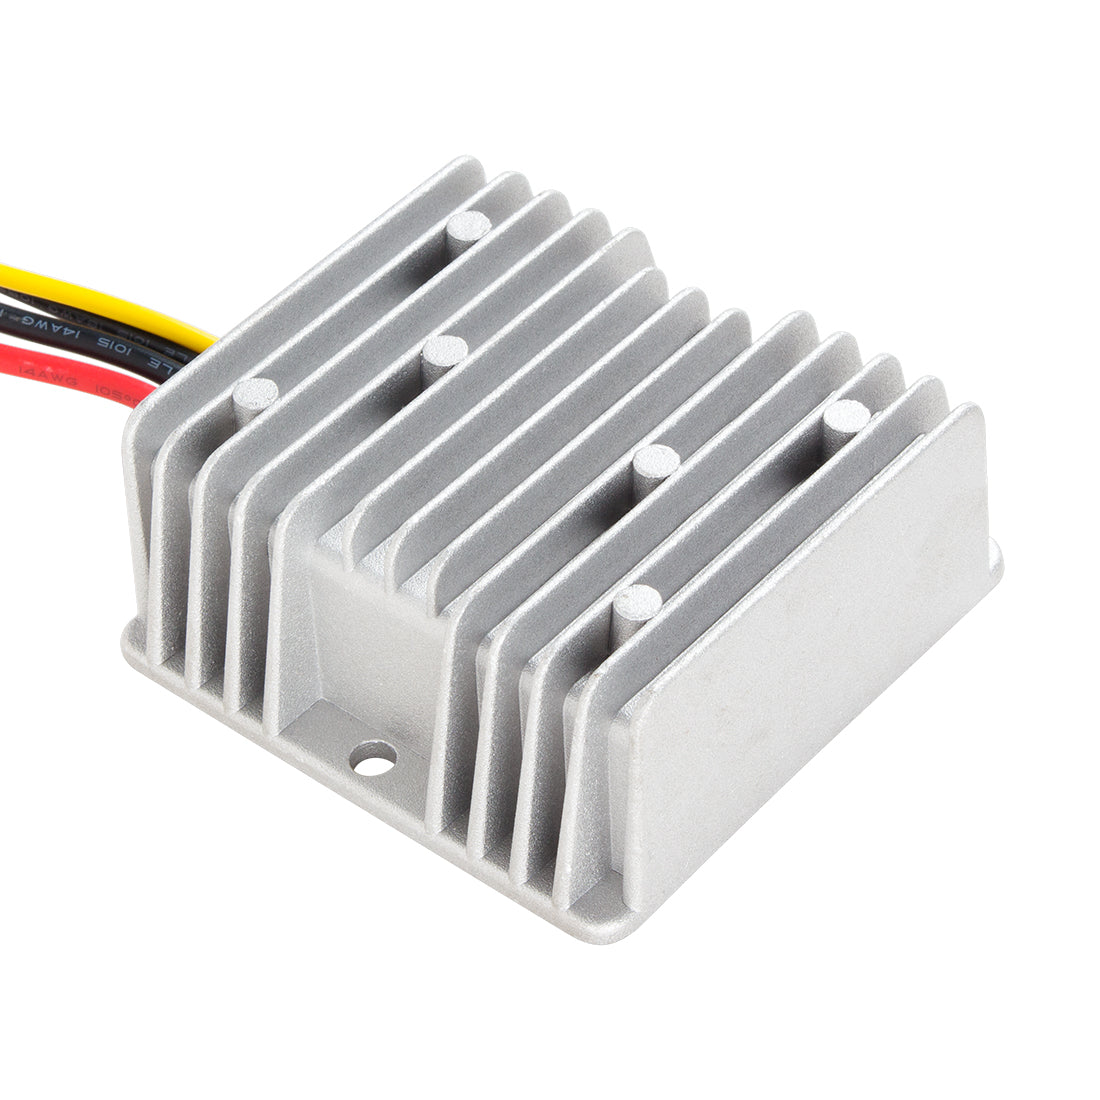 uxcell uxcell Voltage Converter Regulator DC/DC DC 12V Step-Up to DC 48V 3A 144W Power Boost Transformer Waterproof